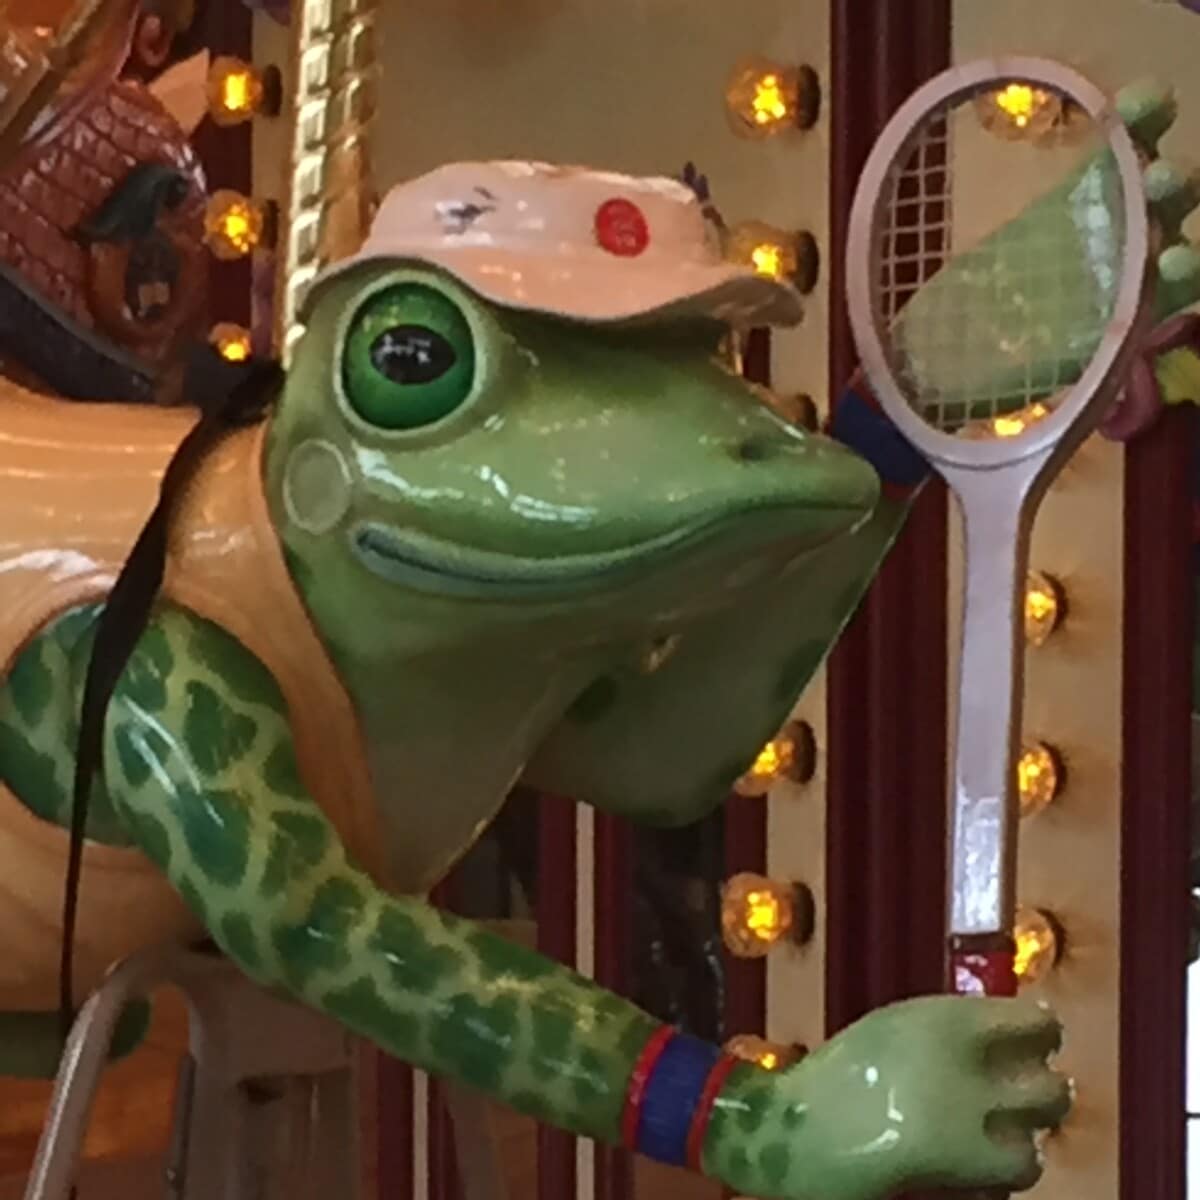 One of the carousel animals.